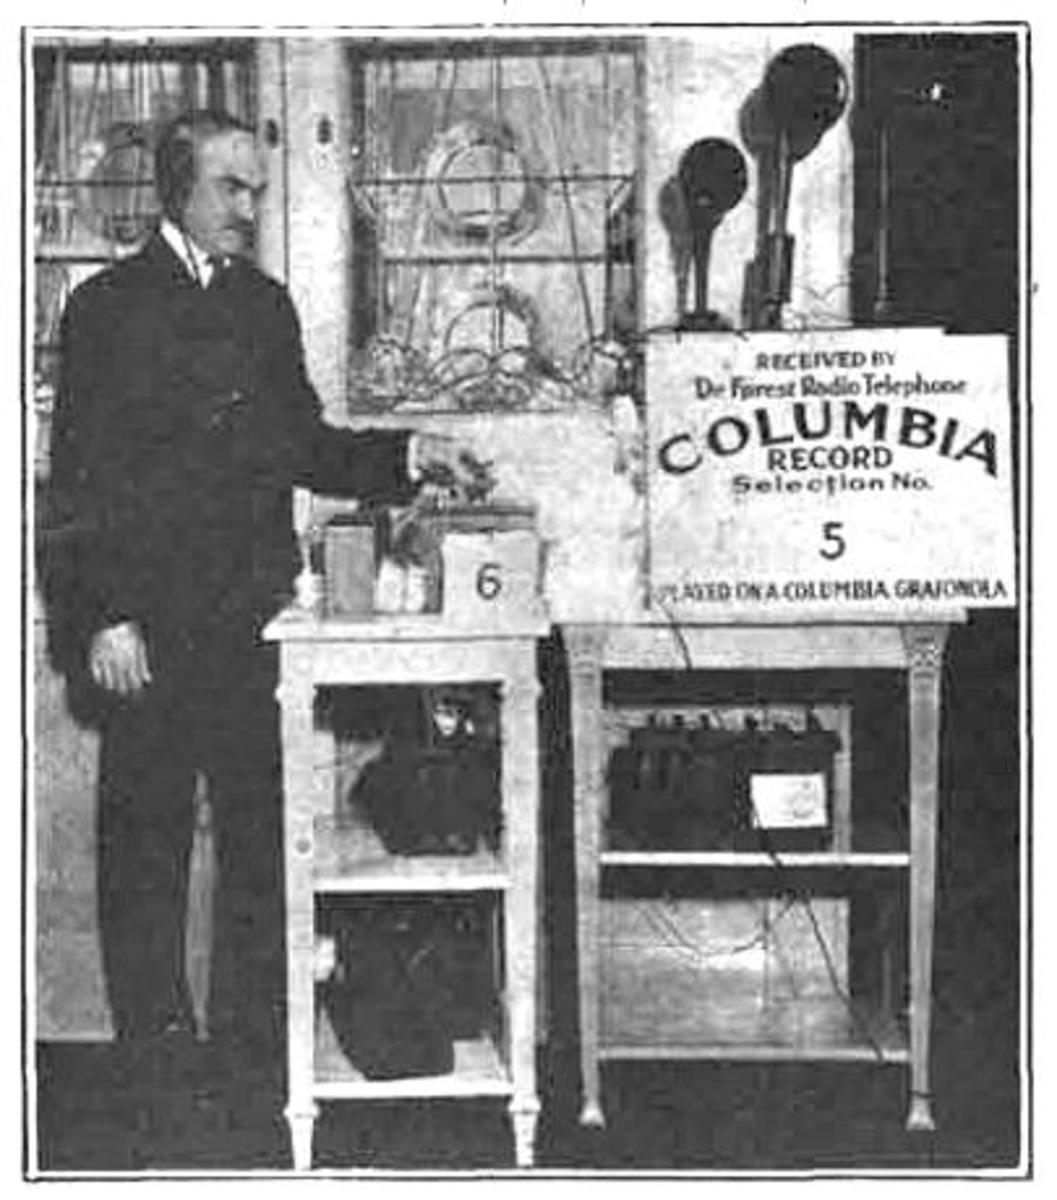 Lee DeForest broadcasting Columbia phonograph records. 